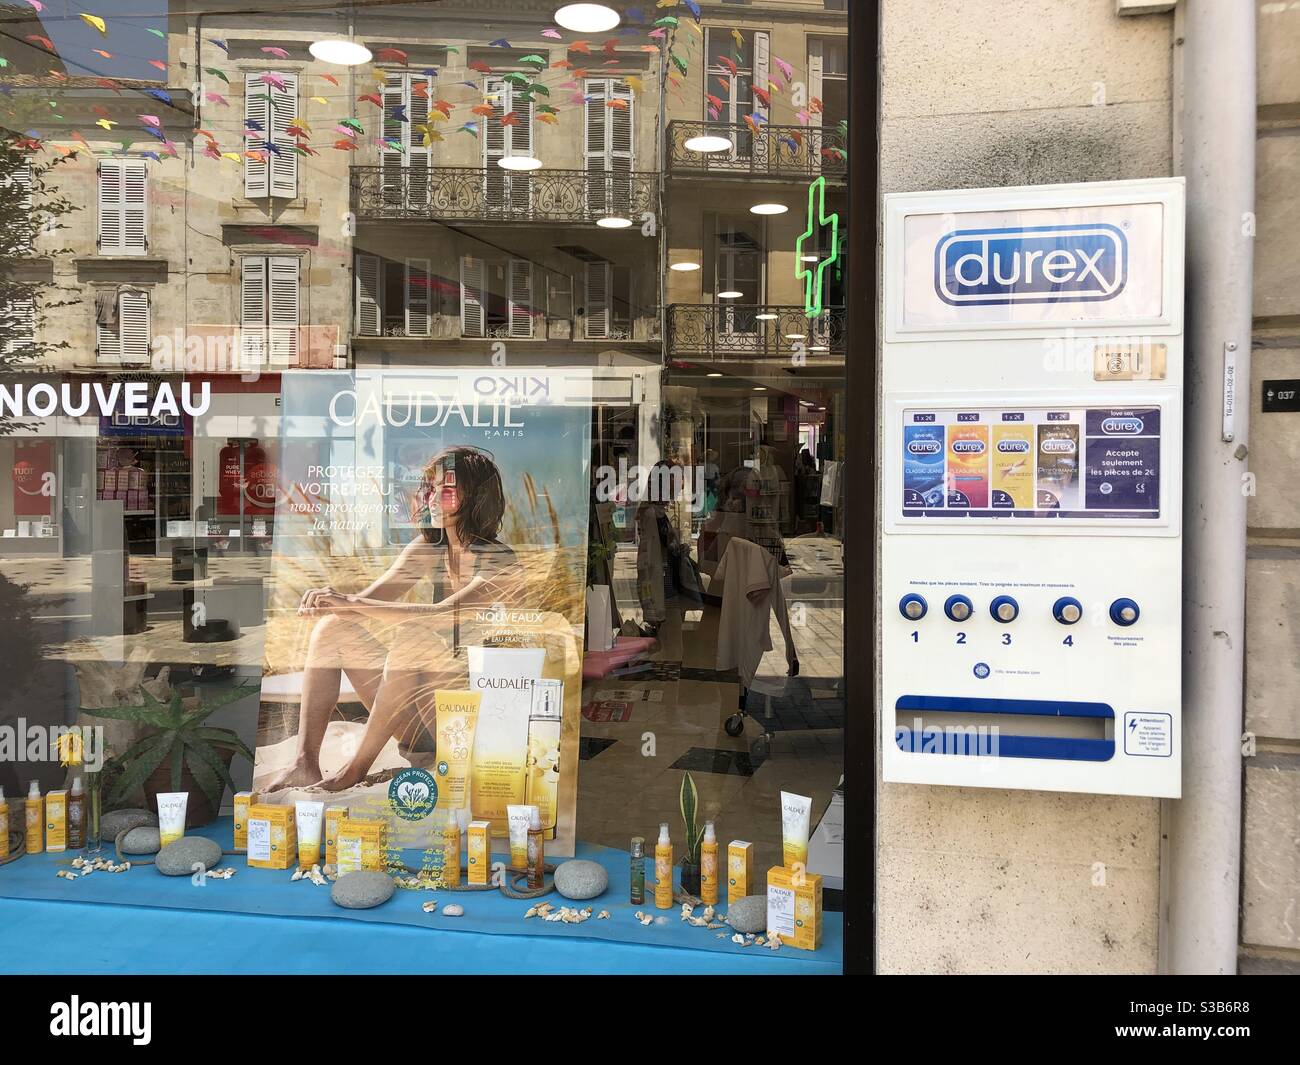 Durex vending machine on the wall outside a pharmacy in France Stock Photo